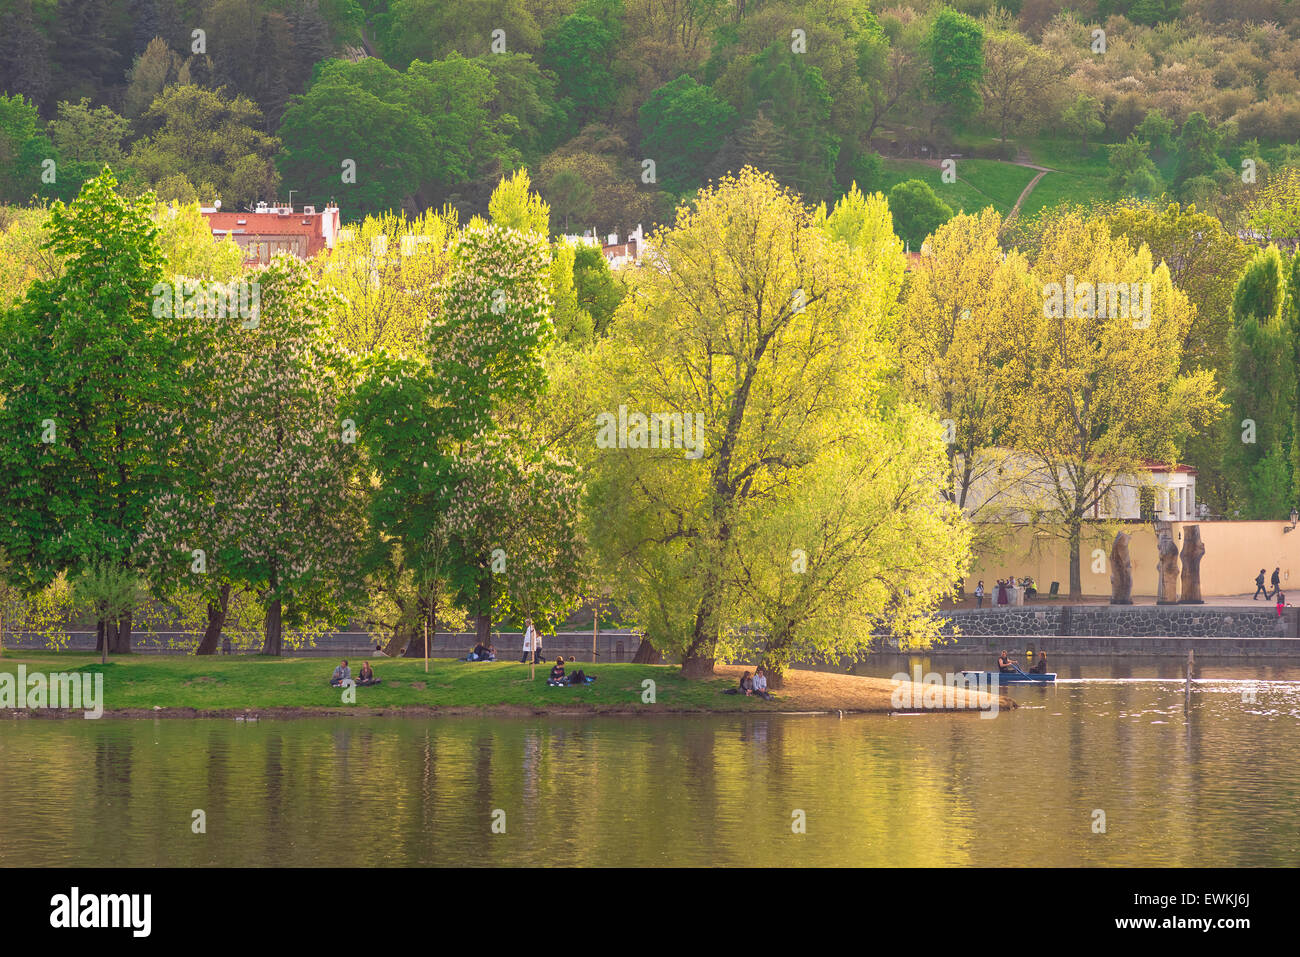 Prague Shooters Island, on Shooter's Island in the middle of the River Vltava young people relax and hire rowing boats on a spring evening, Prague. Stock Photo